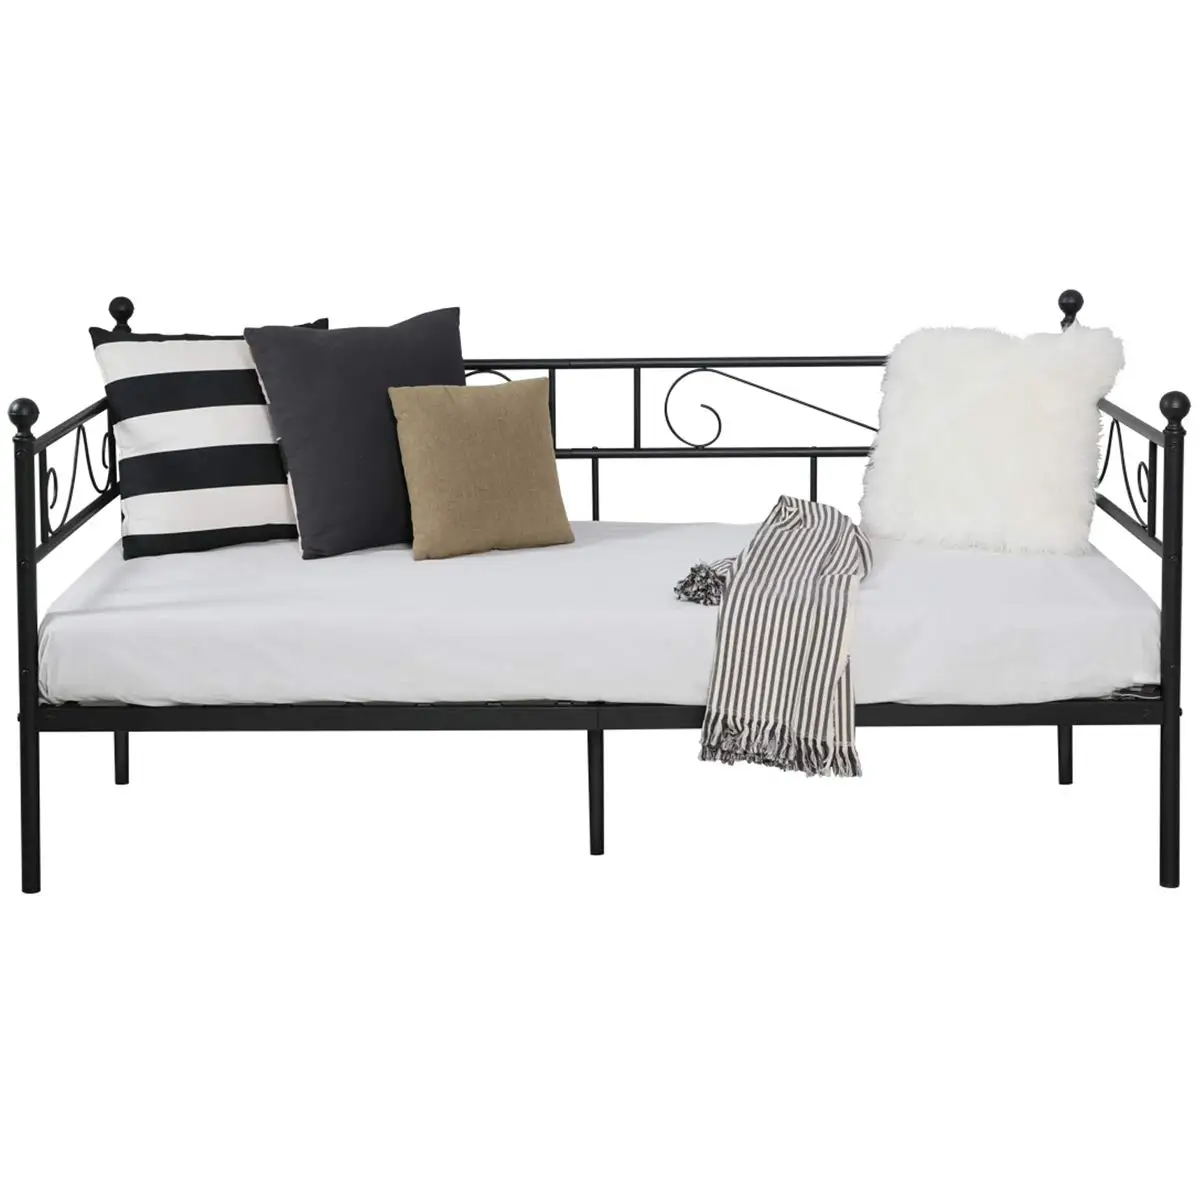 190 cm Mattress Black H.J WeDoo Victorian Style Metal Single Day Bed Frame Guest Sofa Bed Daybeds for Living Room Bed Room Fits for 90 